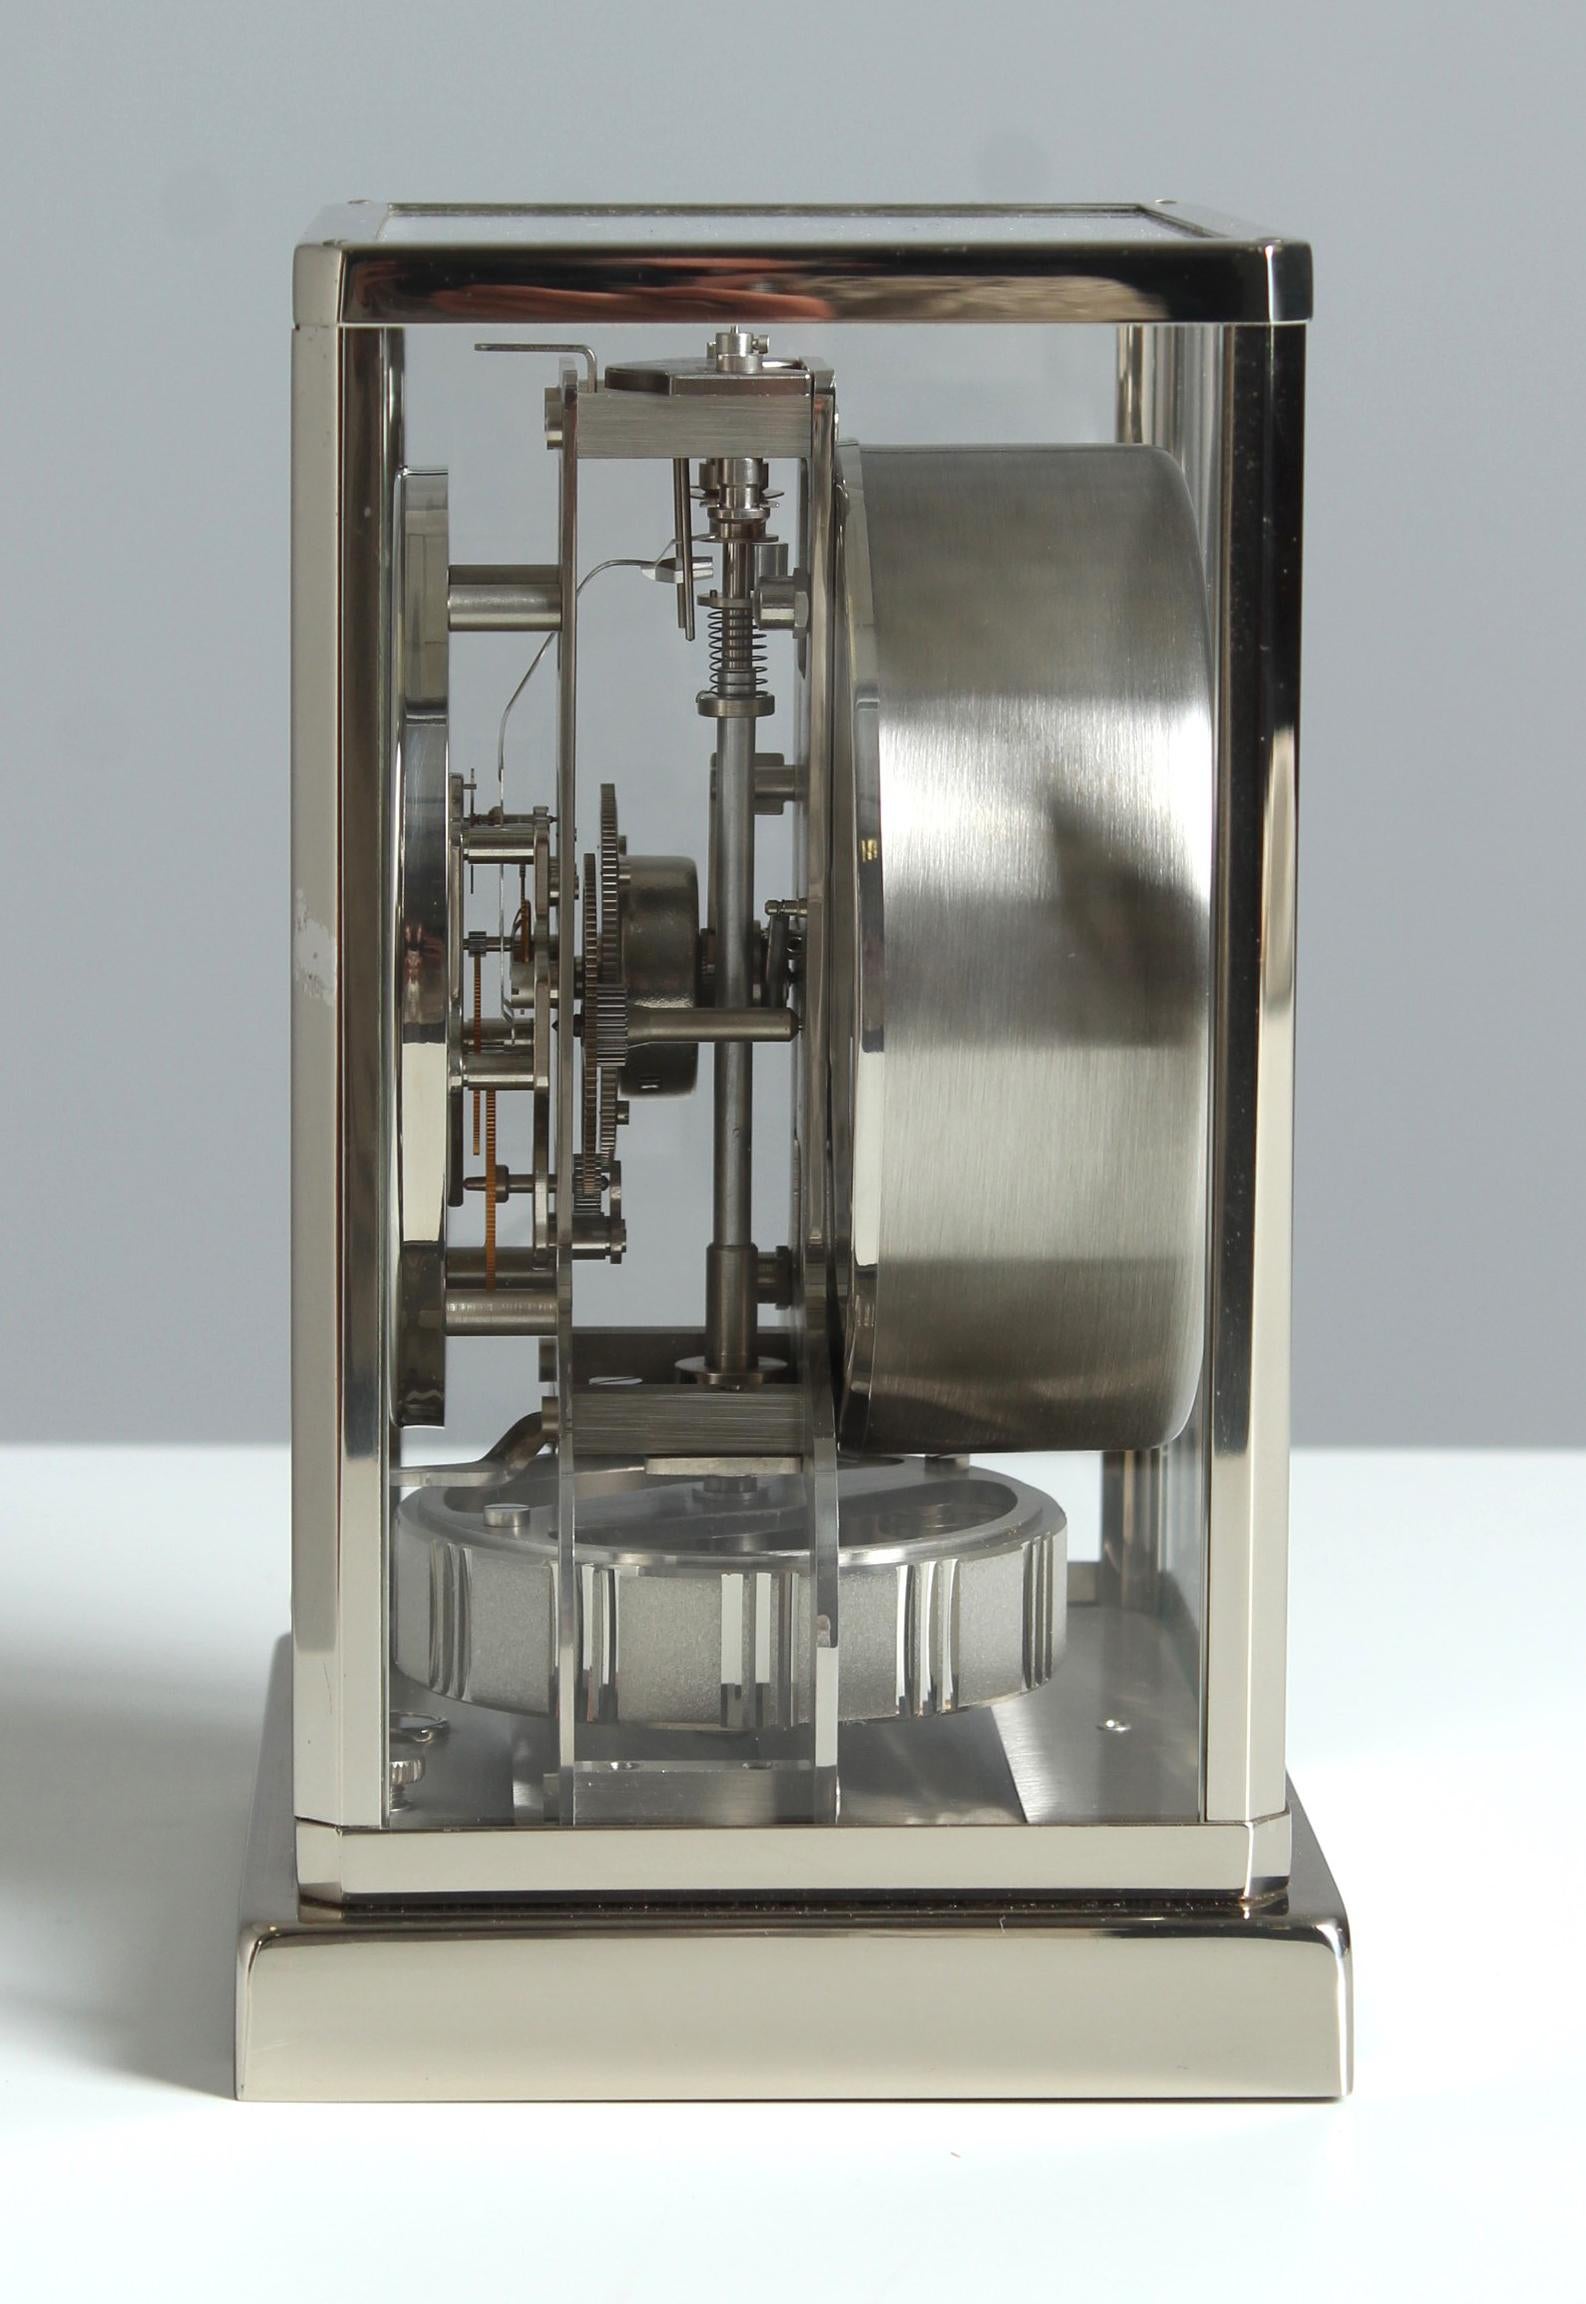 Jaeger LeCoultre, Silver Atmos Clock, Original Nickel Plated, Swiss, 1973 For Sale 9